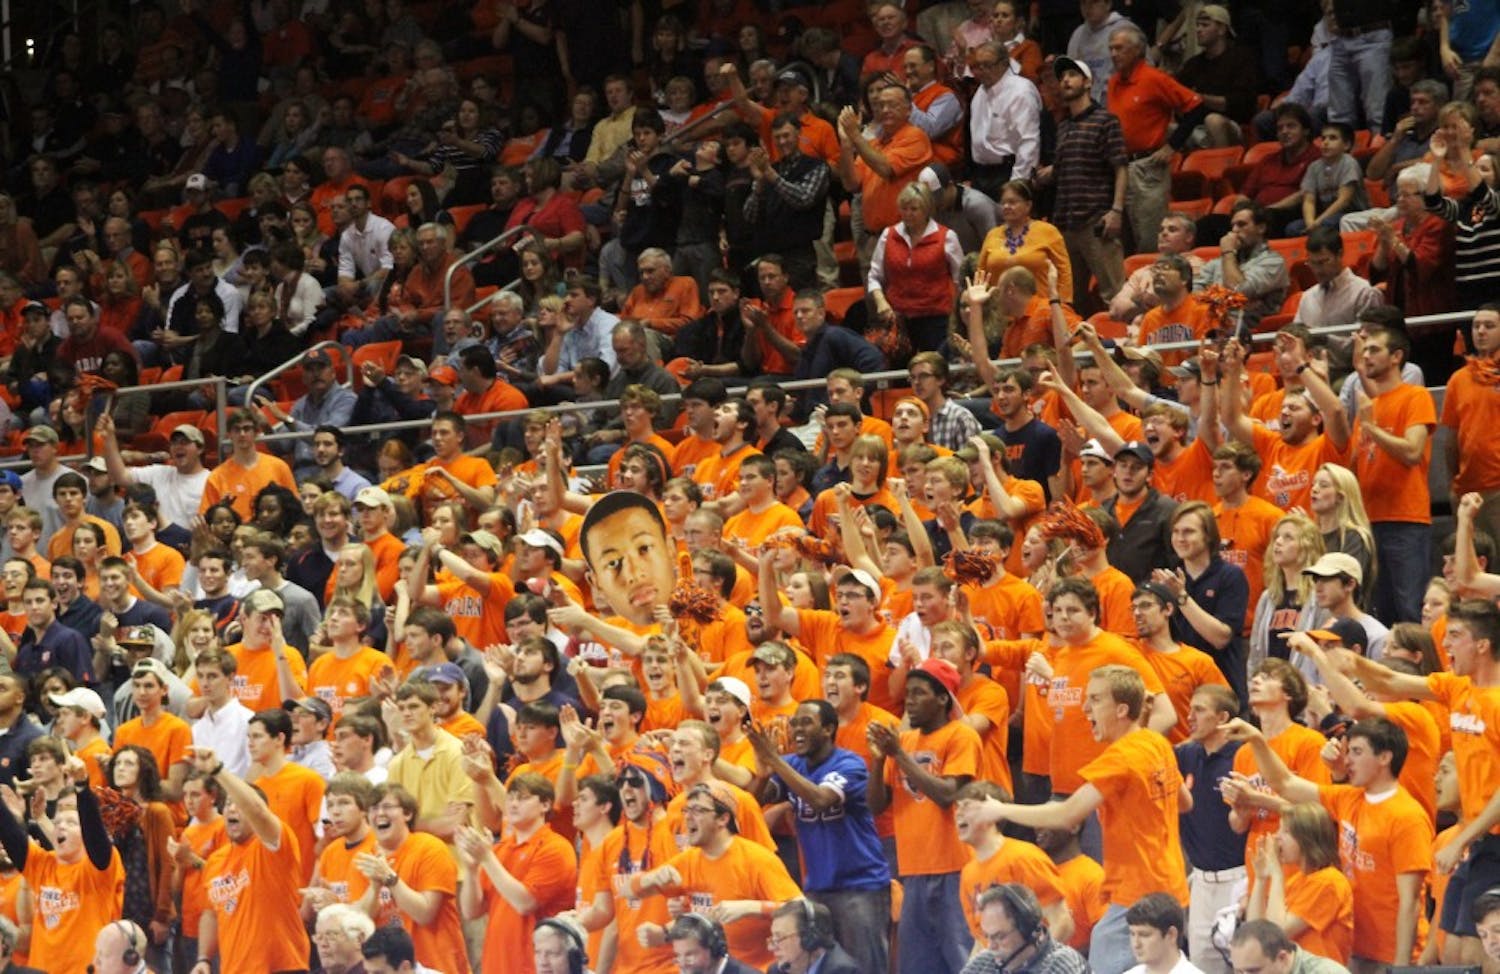 The Jungle cheering on the Tigers on February 6, 2013. (Katherine McCahey / ASSISTANT PHOTO EDITOR)